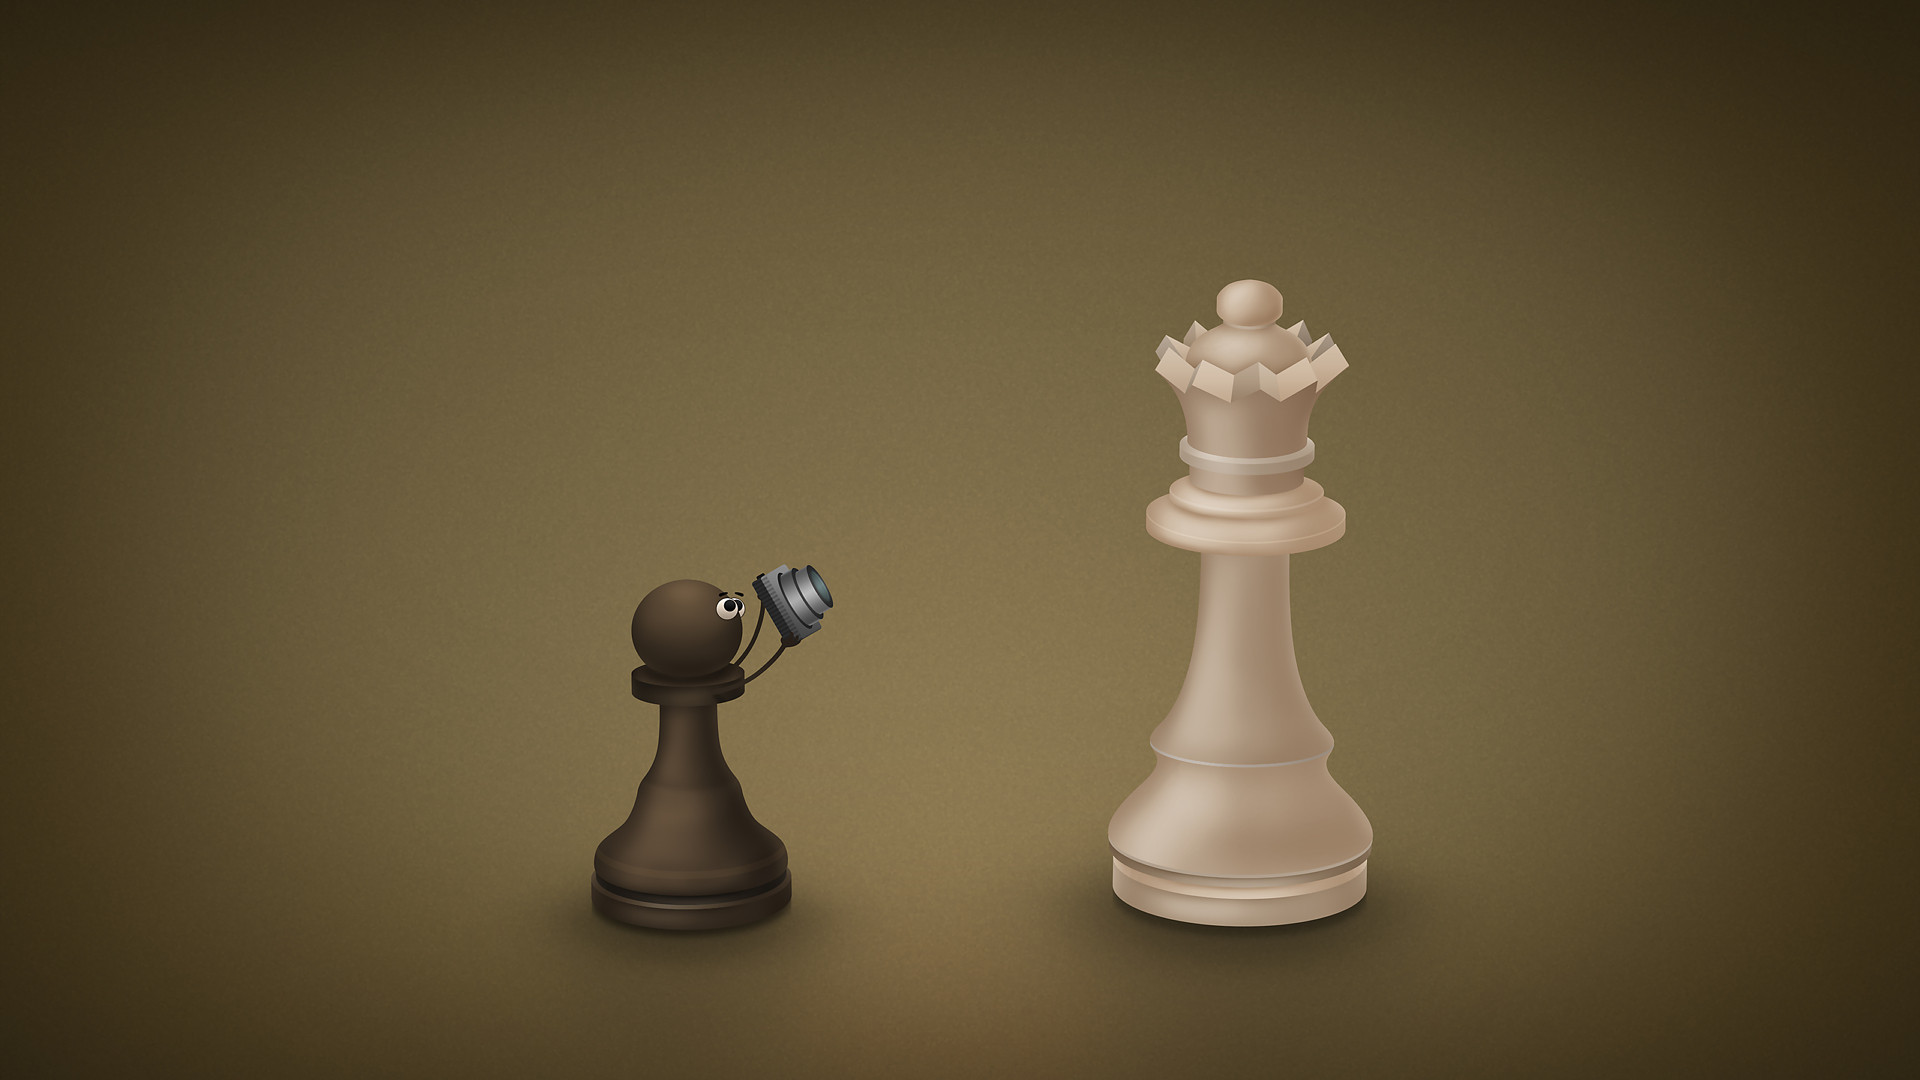 4k Chess Wallpapers - Wallpaper Cave